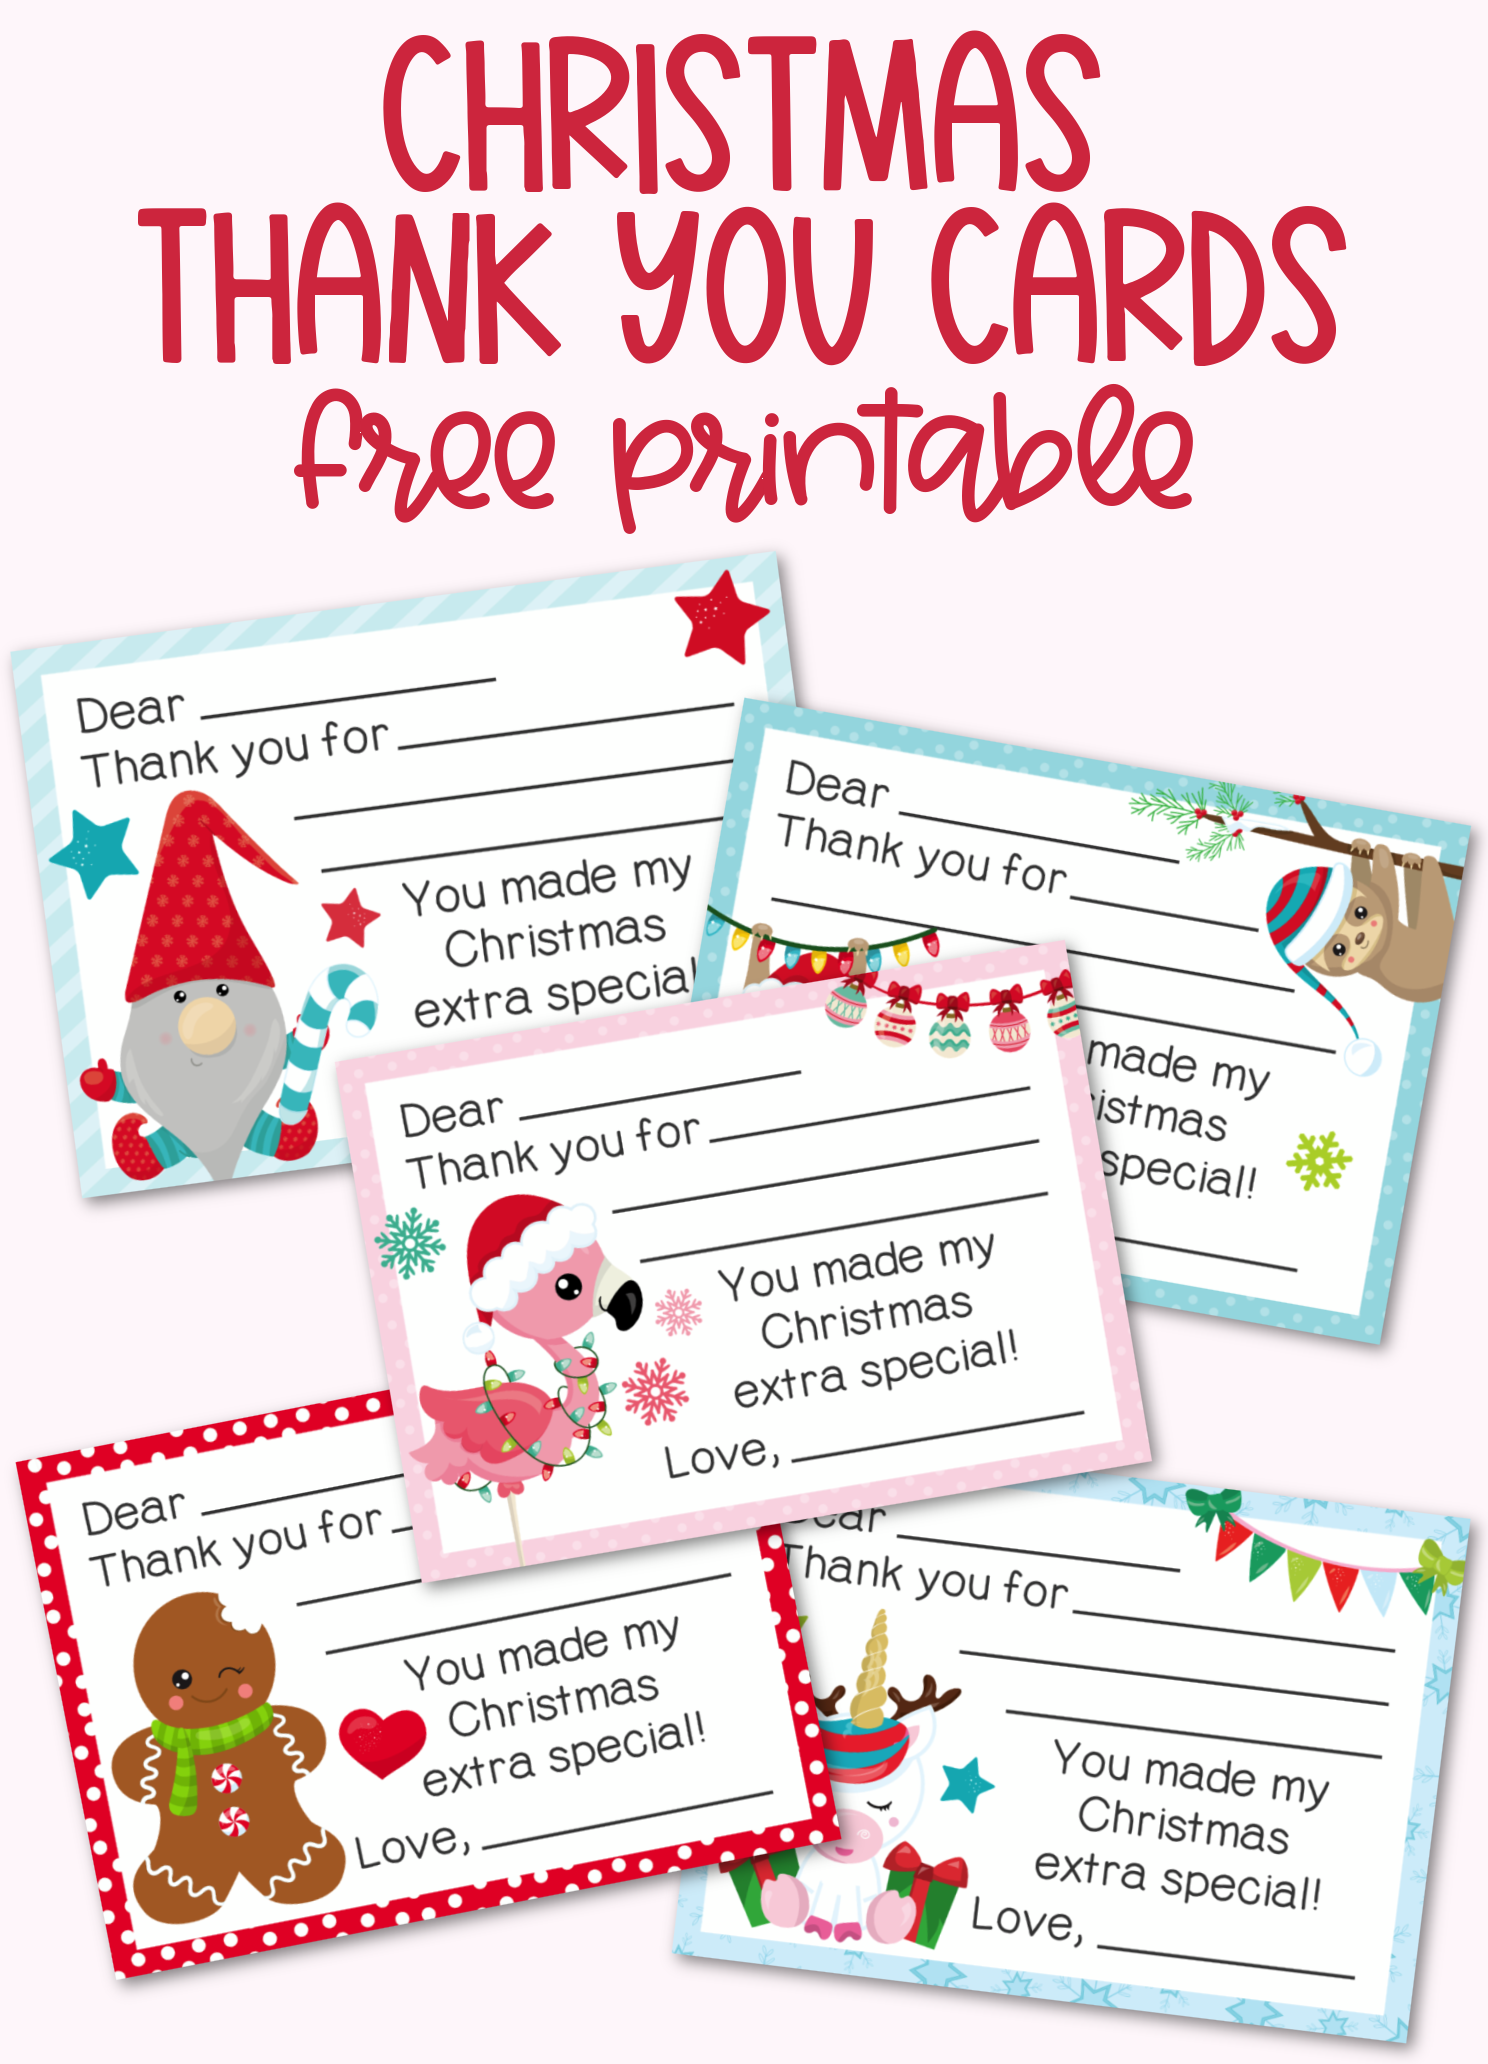 Fill In The Blank Christmas Thank You Cards Free Printable